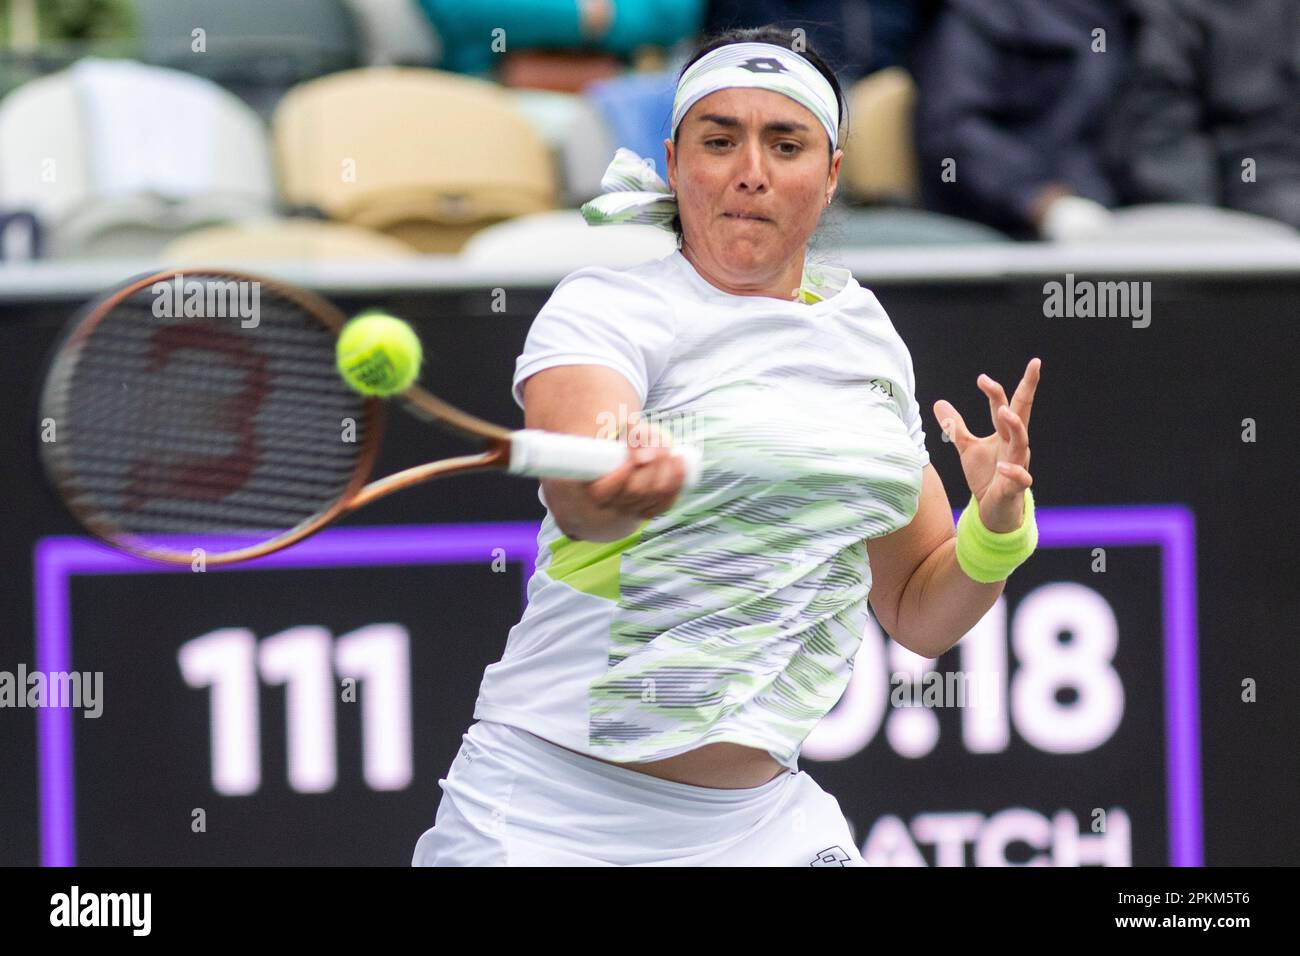 Ons Jabeur, of Tunisia, returns a shot to Daria Kasatkina, of Russia, during a semifinal game at the Charleston Open tennis tournament in Charleston, S.C., Saturday, April 8, 2023